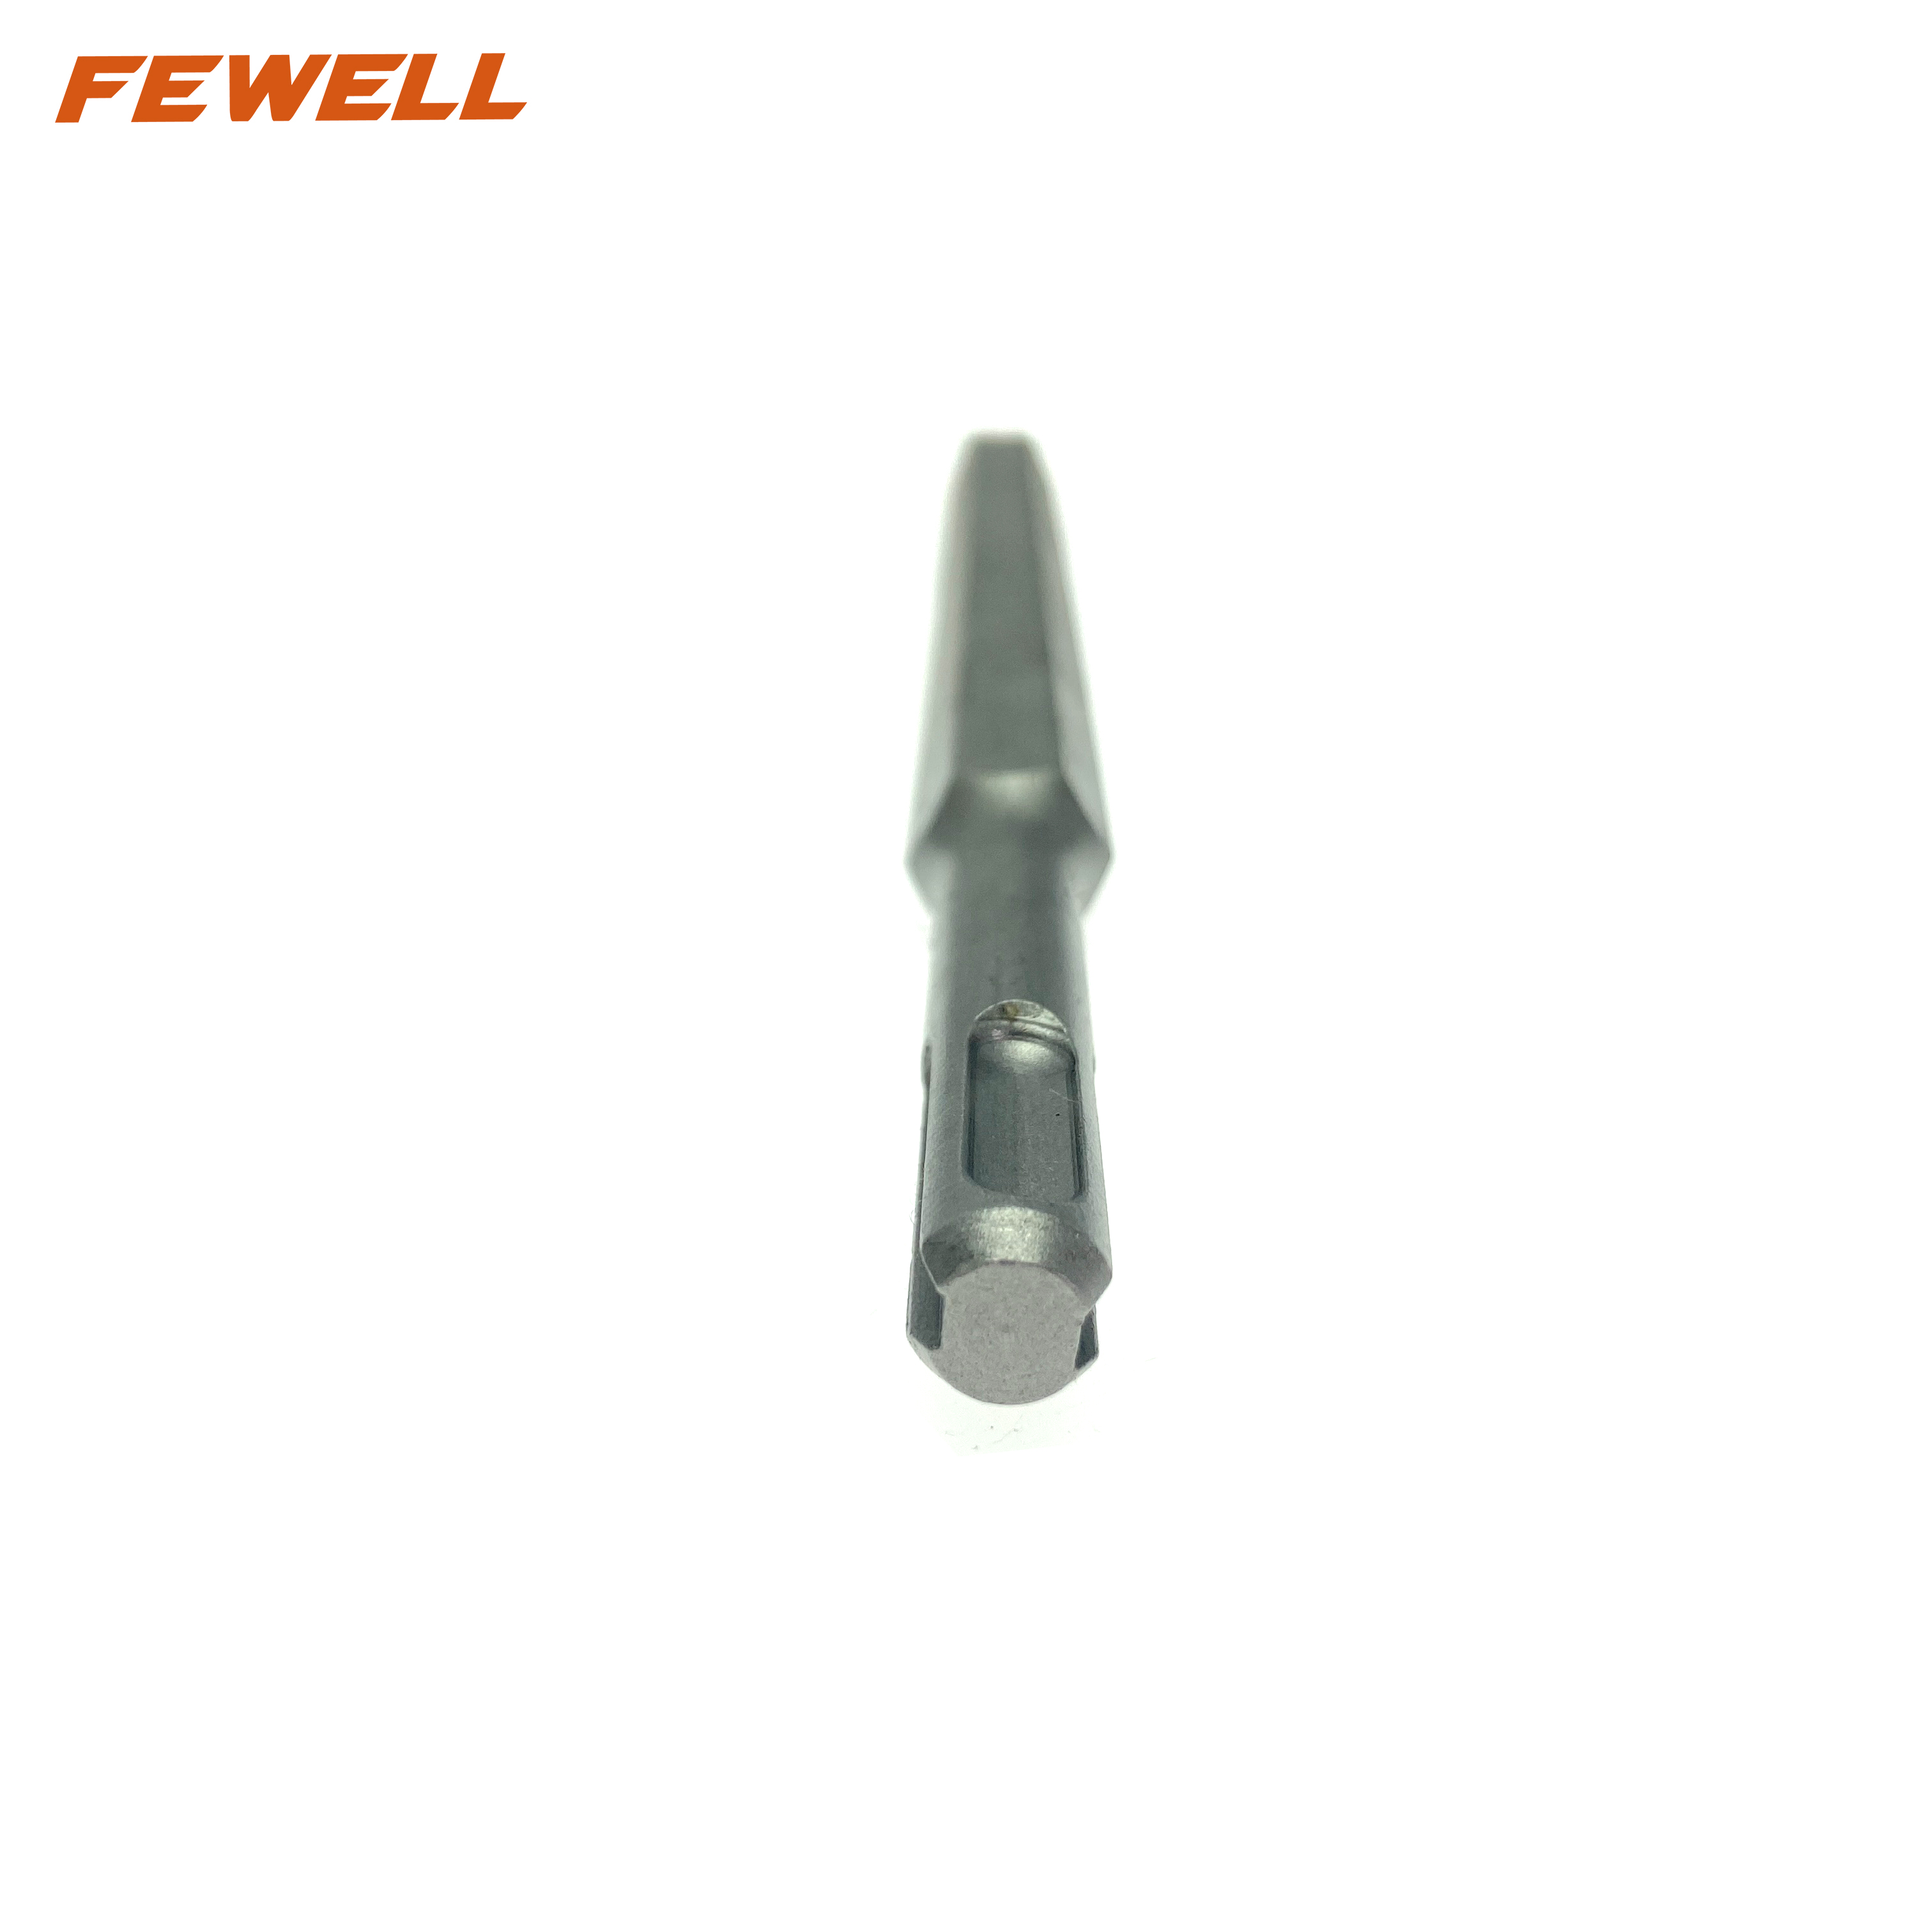  High quality 14mm SDS Plus Electric hammer drill point chisel for Tile Masonry Concrete Brick stone